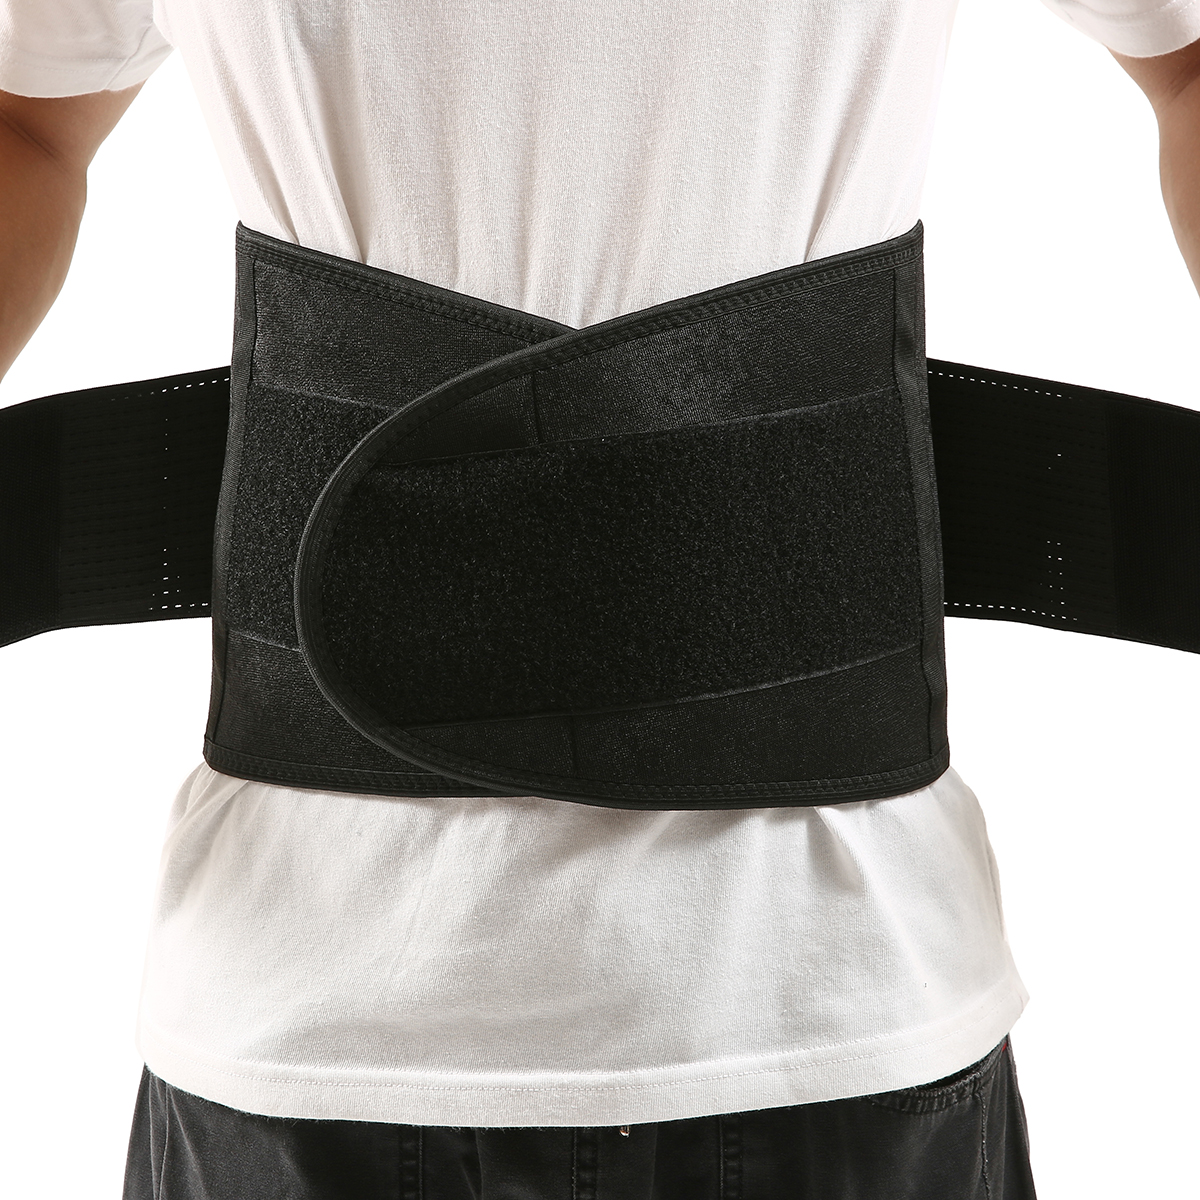 CHARMINER-Back-Support-Lumbar-Brace-Massage-Support-Belt-Dual-Adjustable-Belt-for-Pain-Relief-and-In-1884457-7